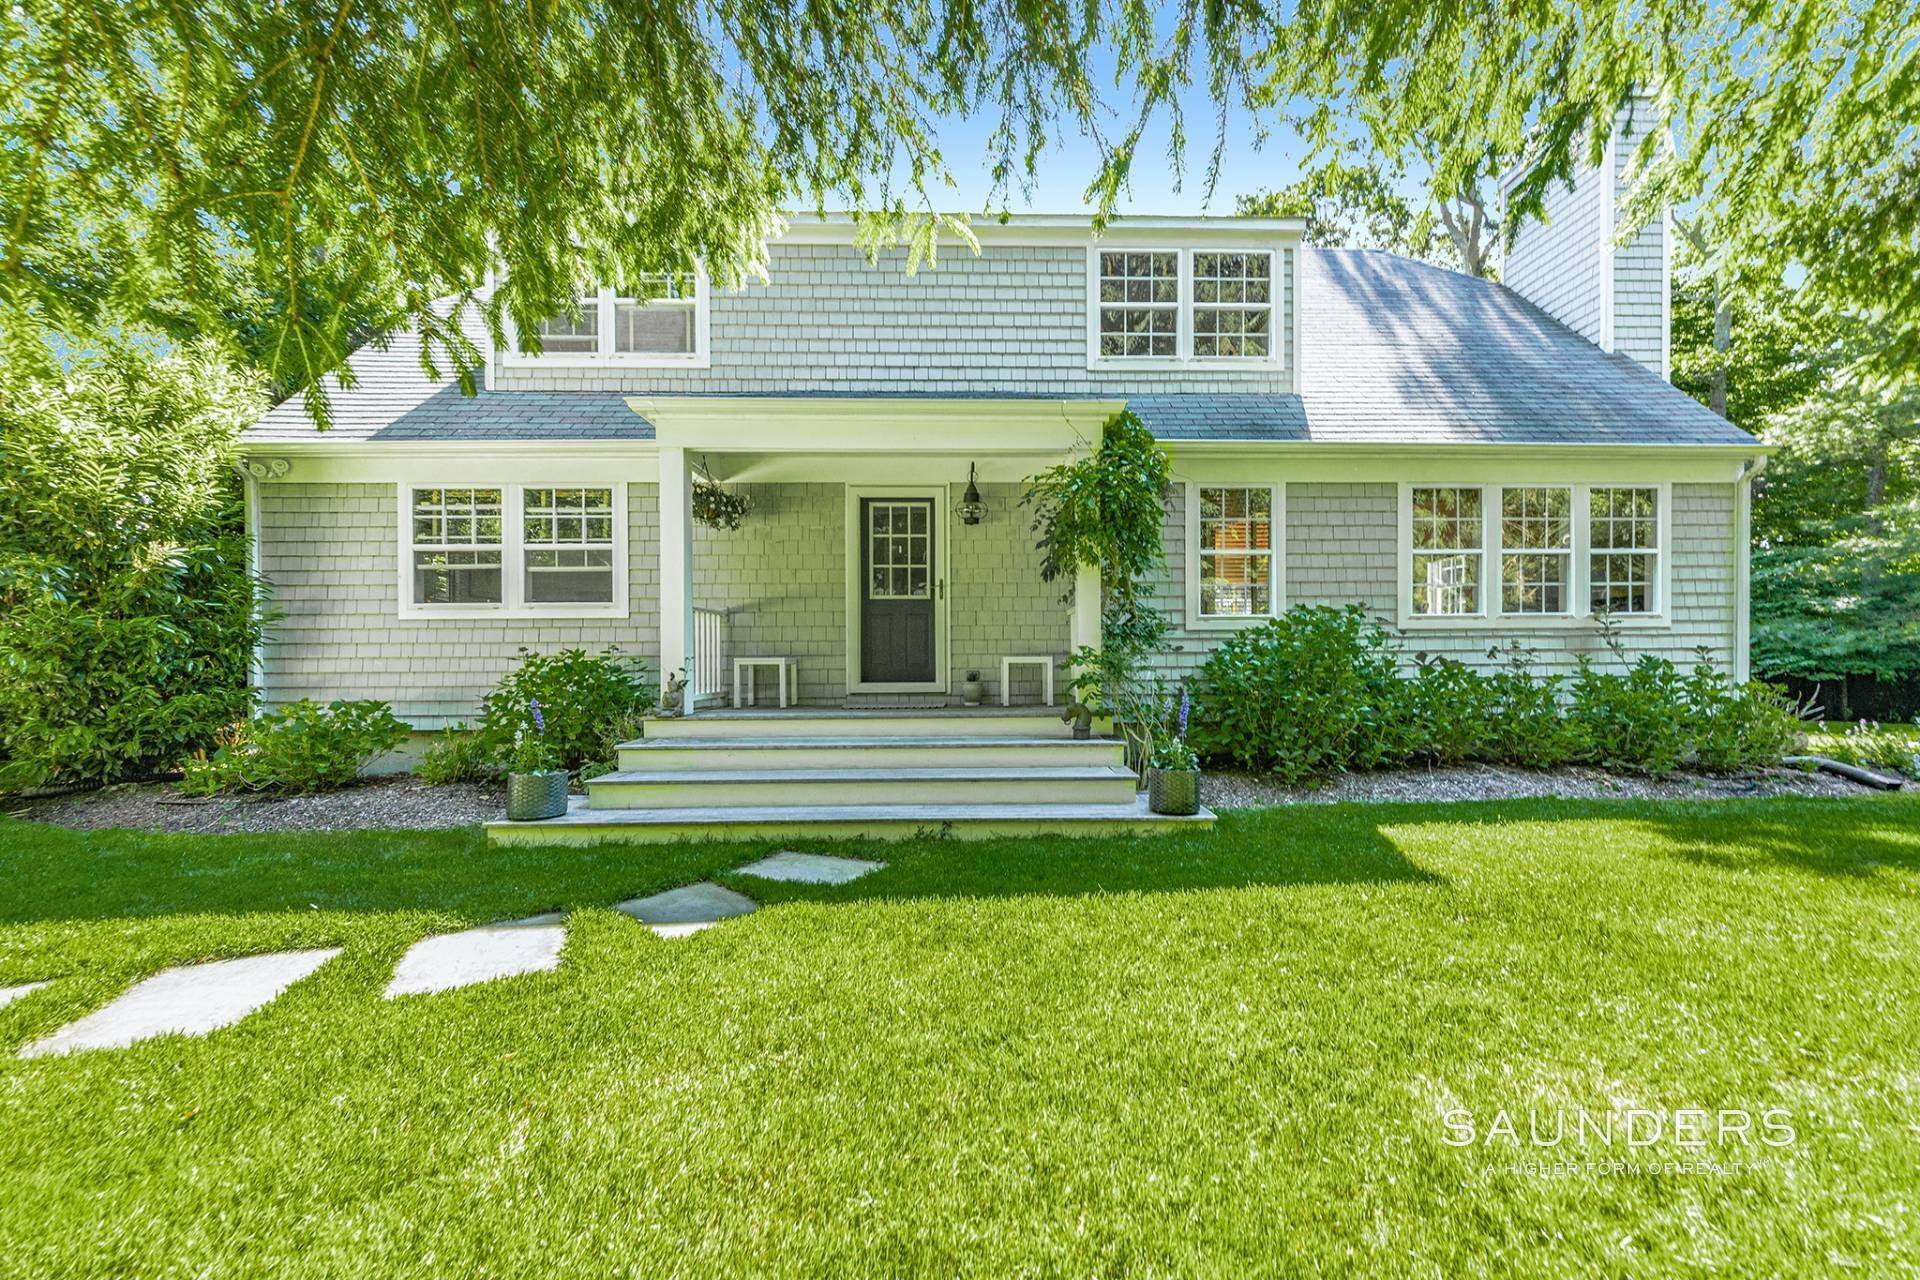 22. Single Family Homes for Sale at Ideally Located Between Amagansett & Eh Village 4 Talkhouse Walk, East Hampton, NY 11937